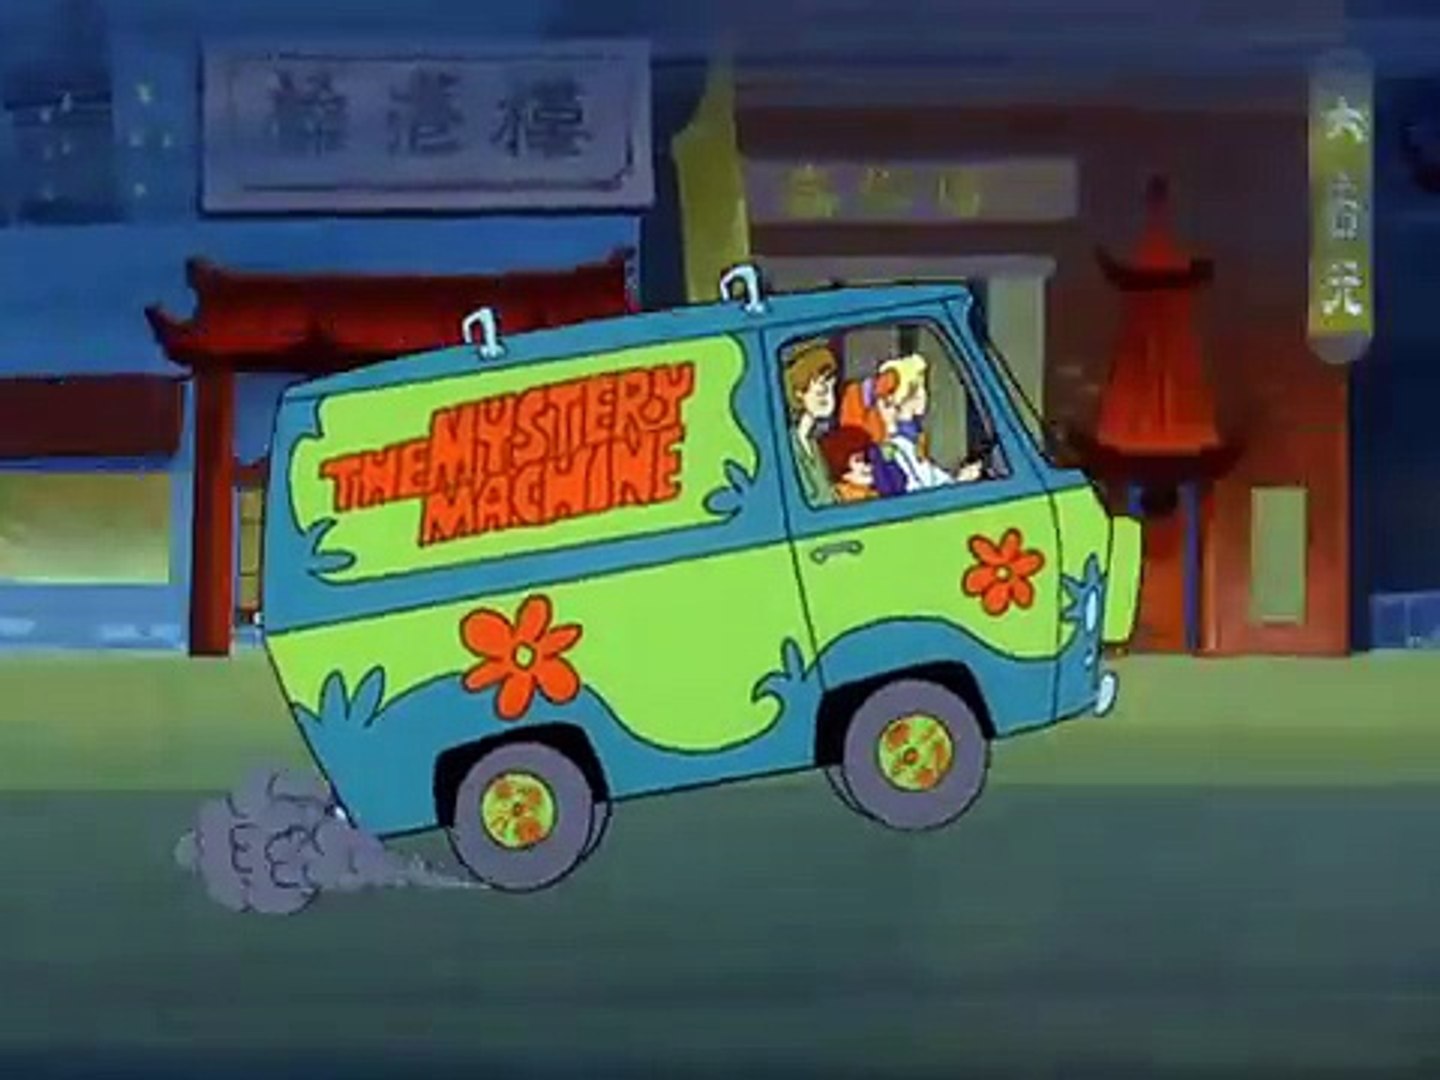 This game is a Scooby Doo chase scene